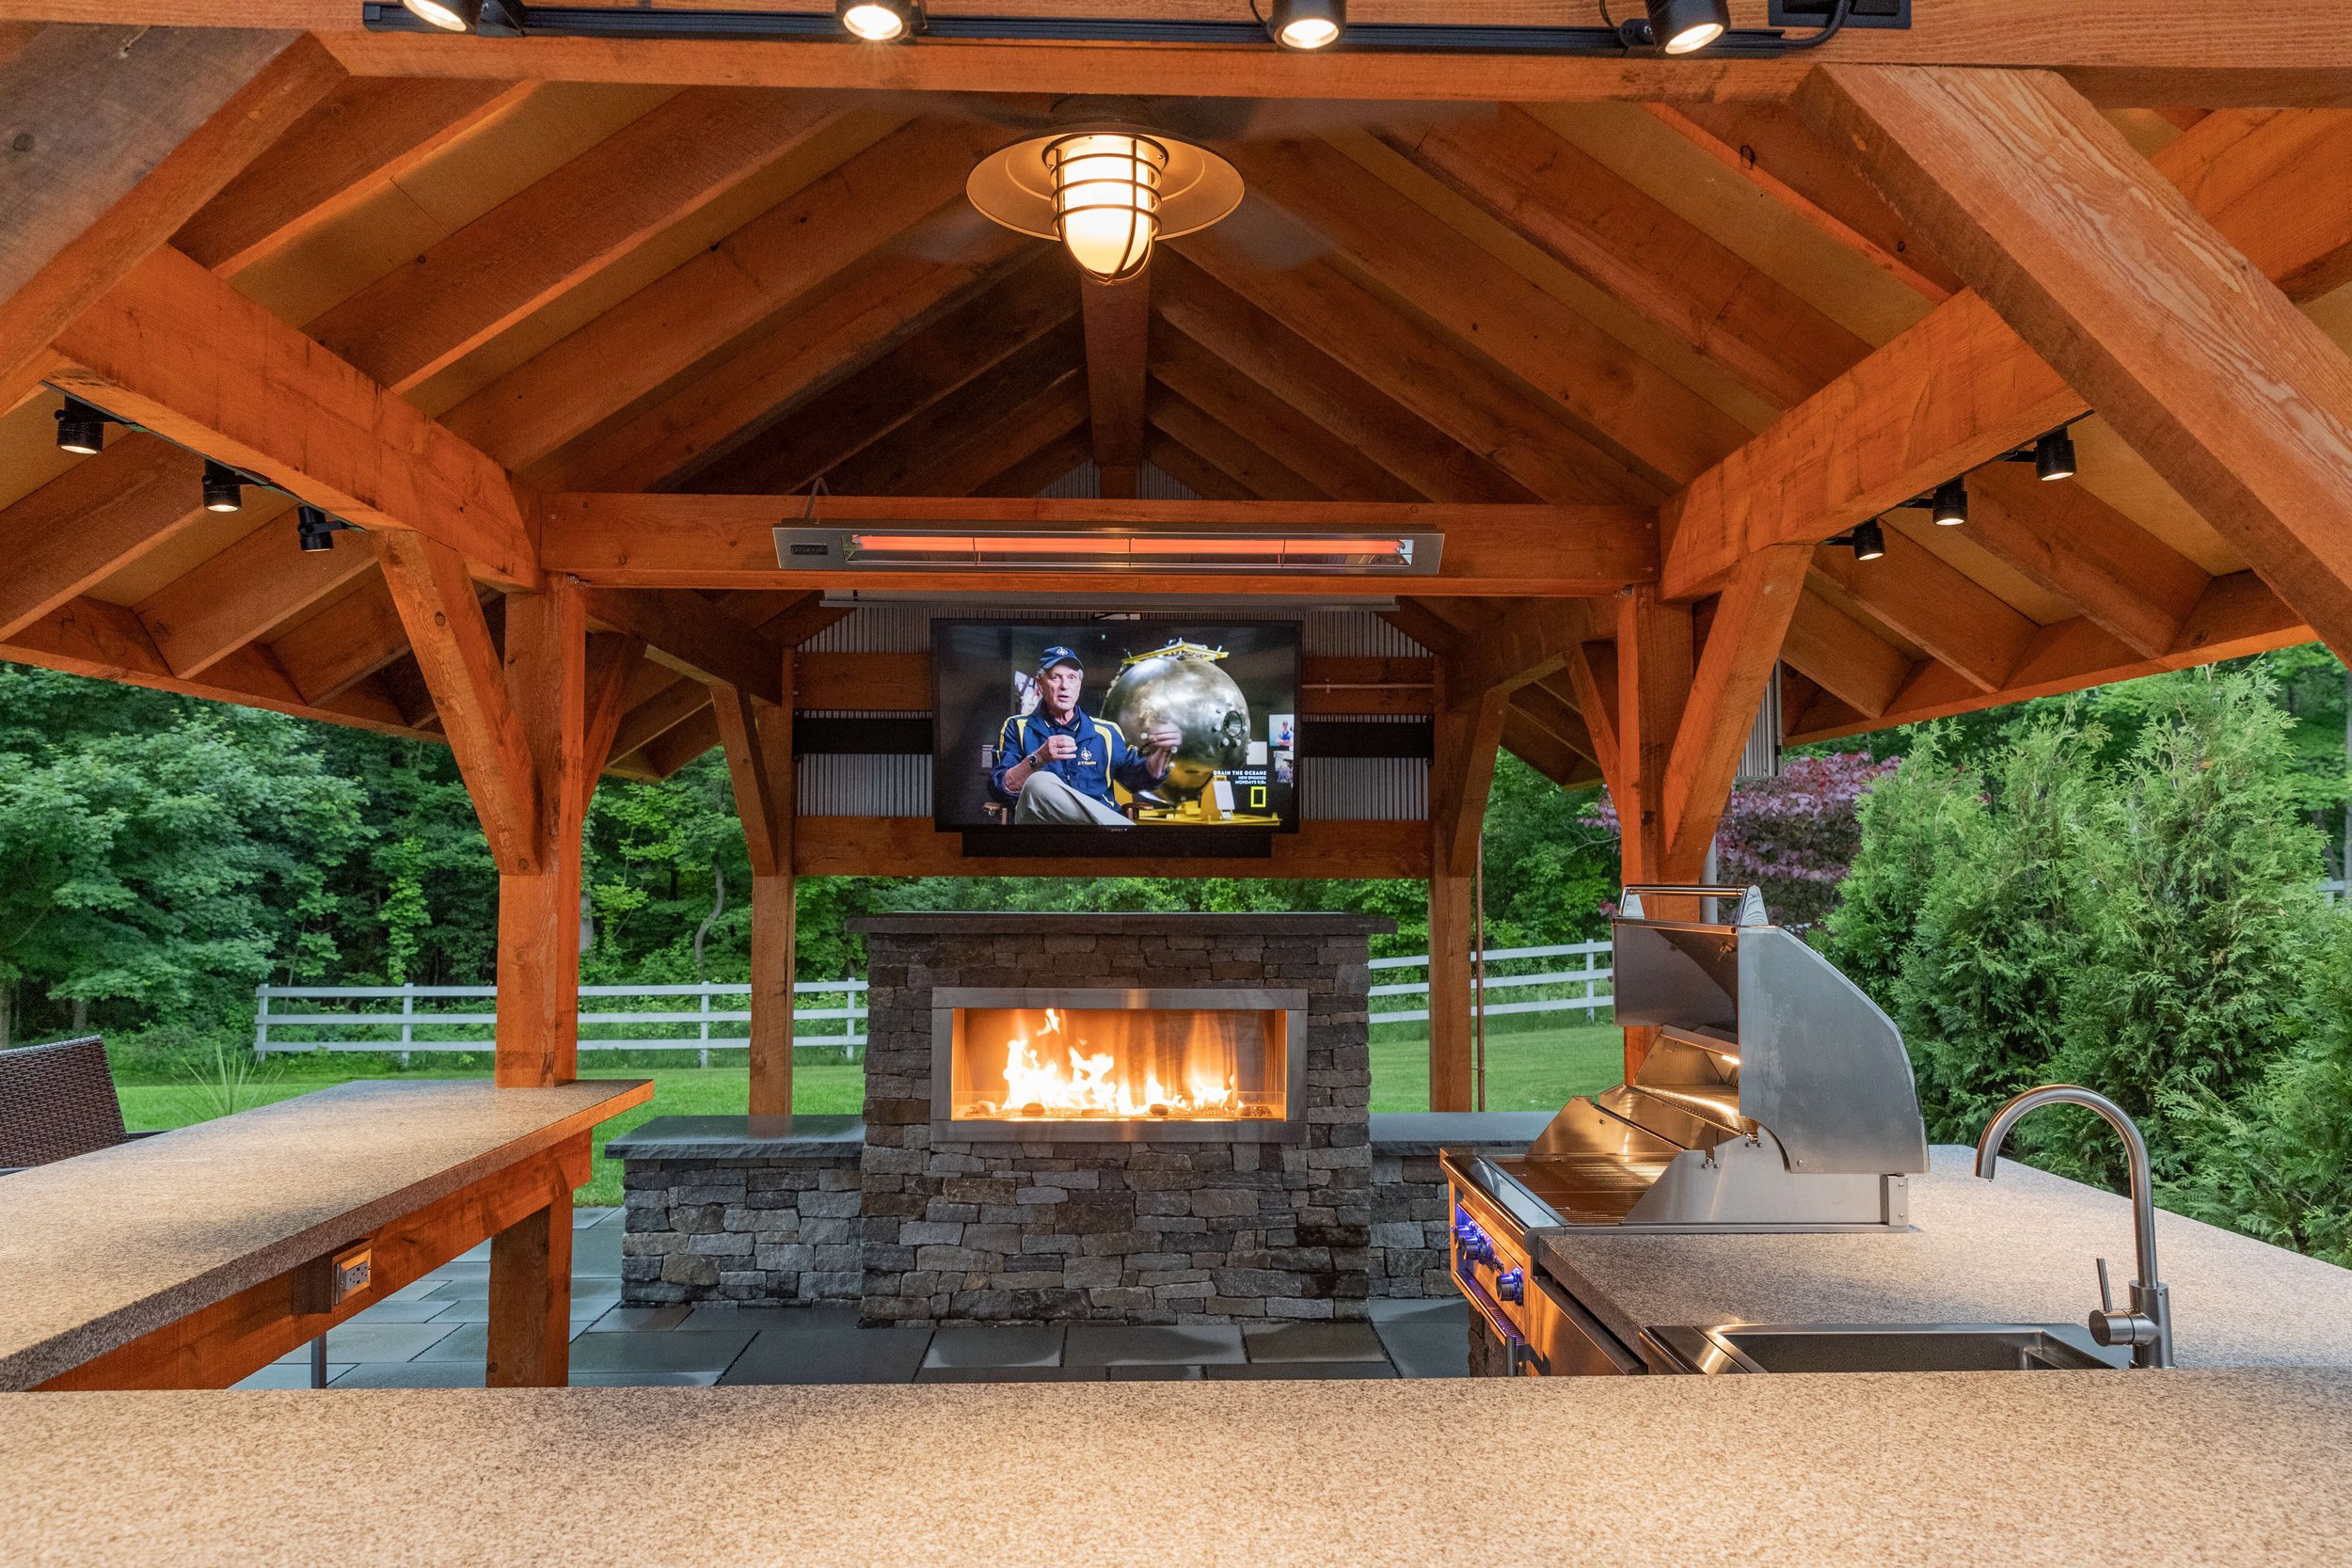 coverd fire place and TV by vermont landscape architect